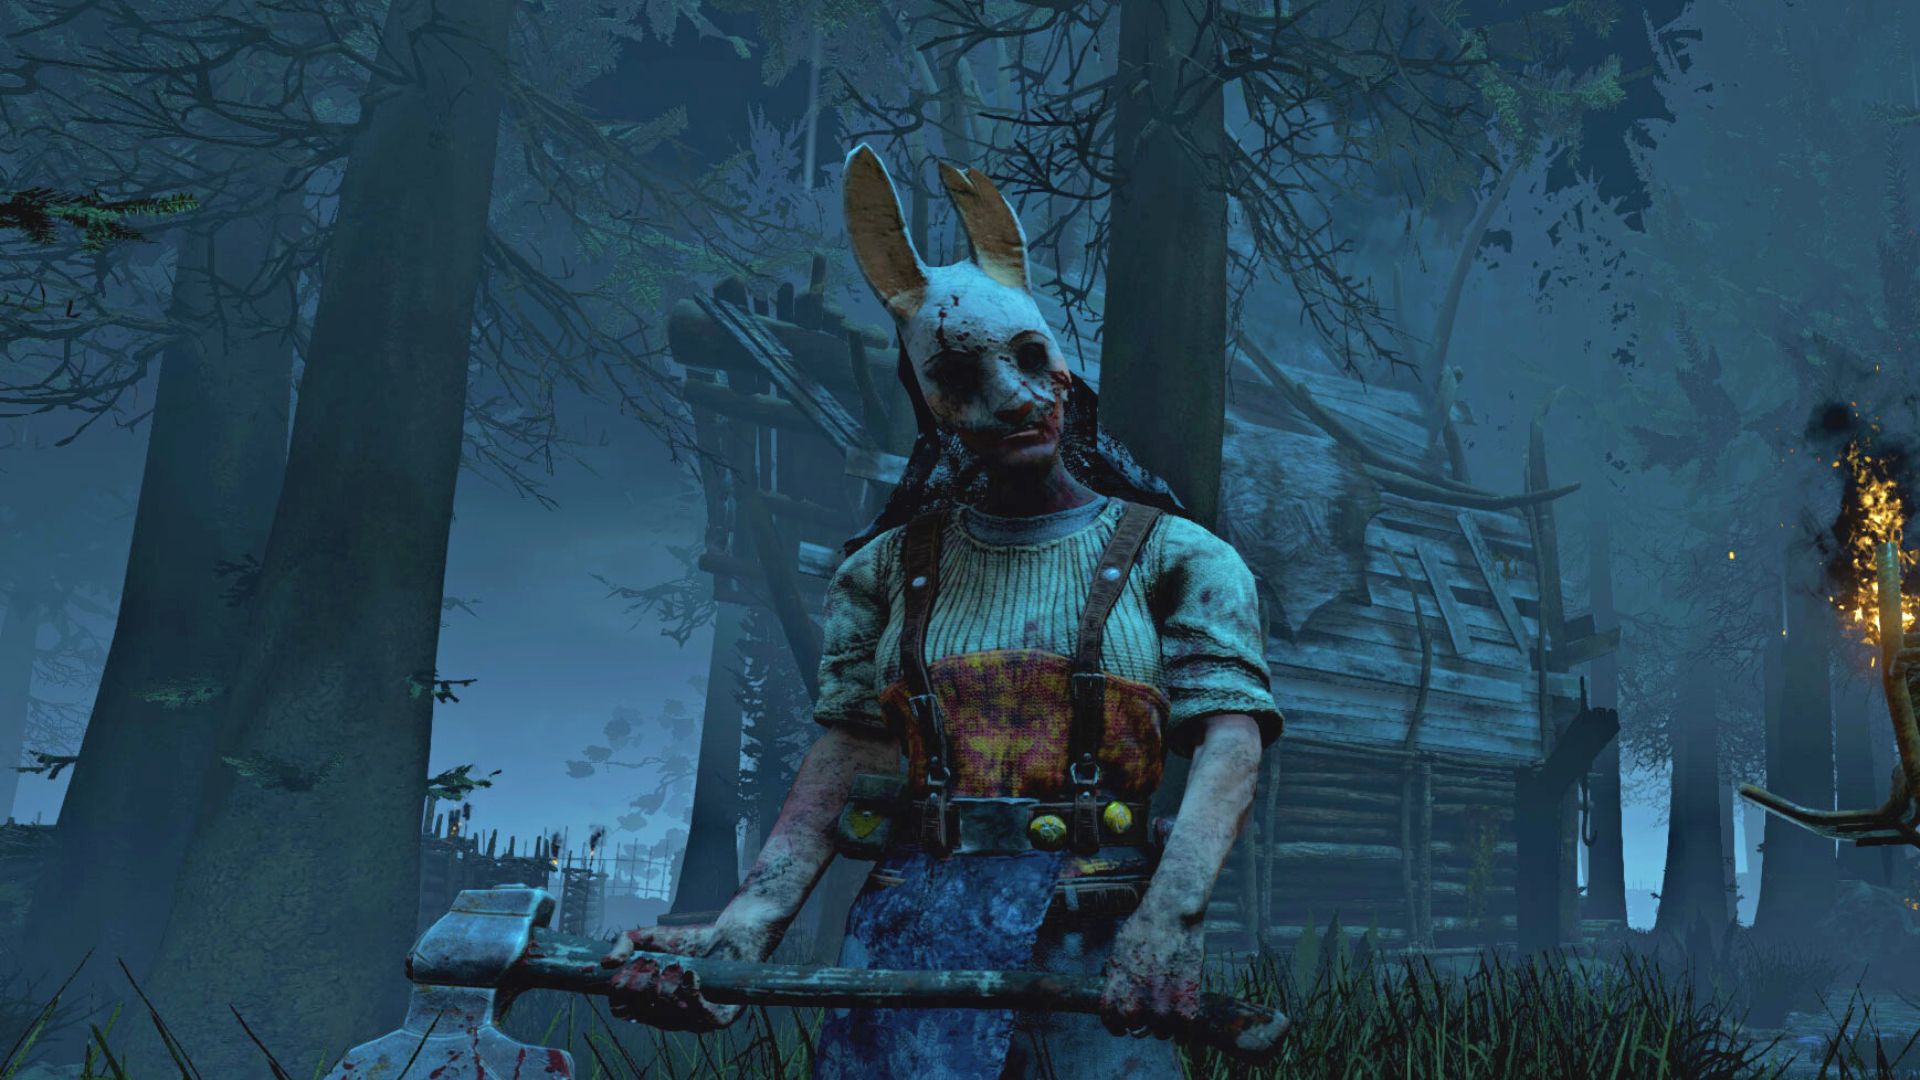 Dead by Daylight review – a decent stab at an interactive slasher flick, Games